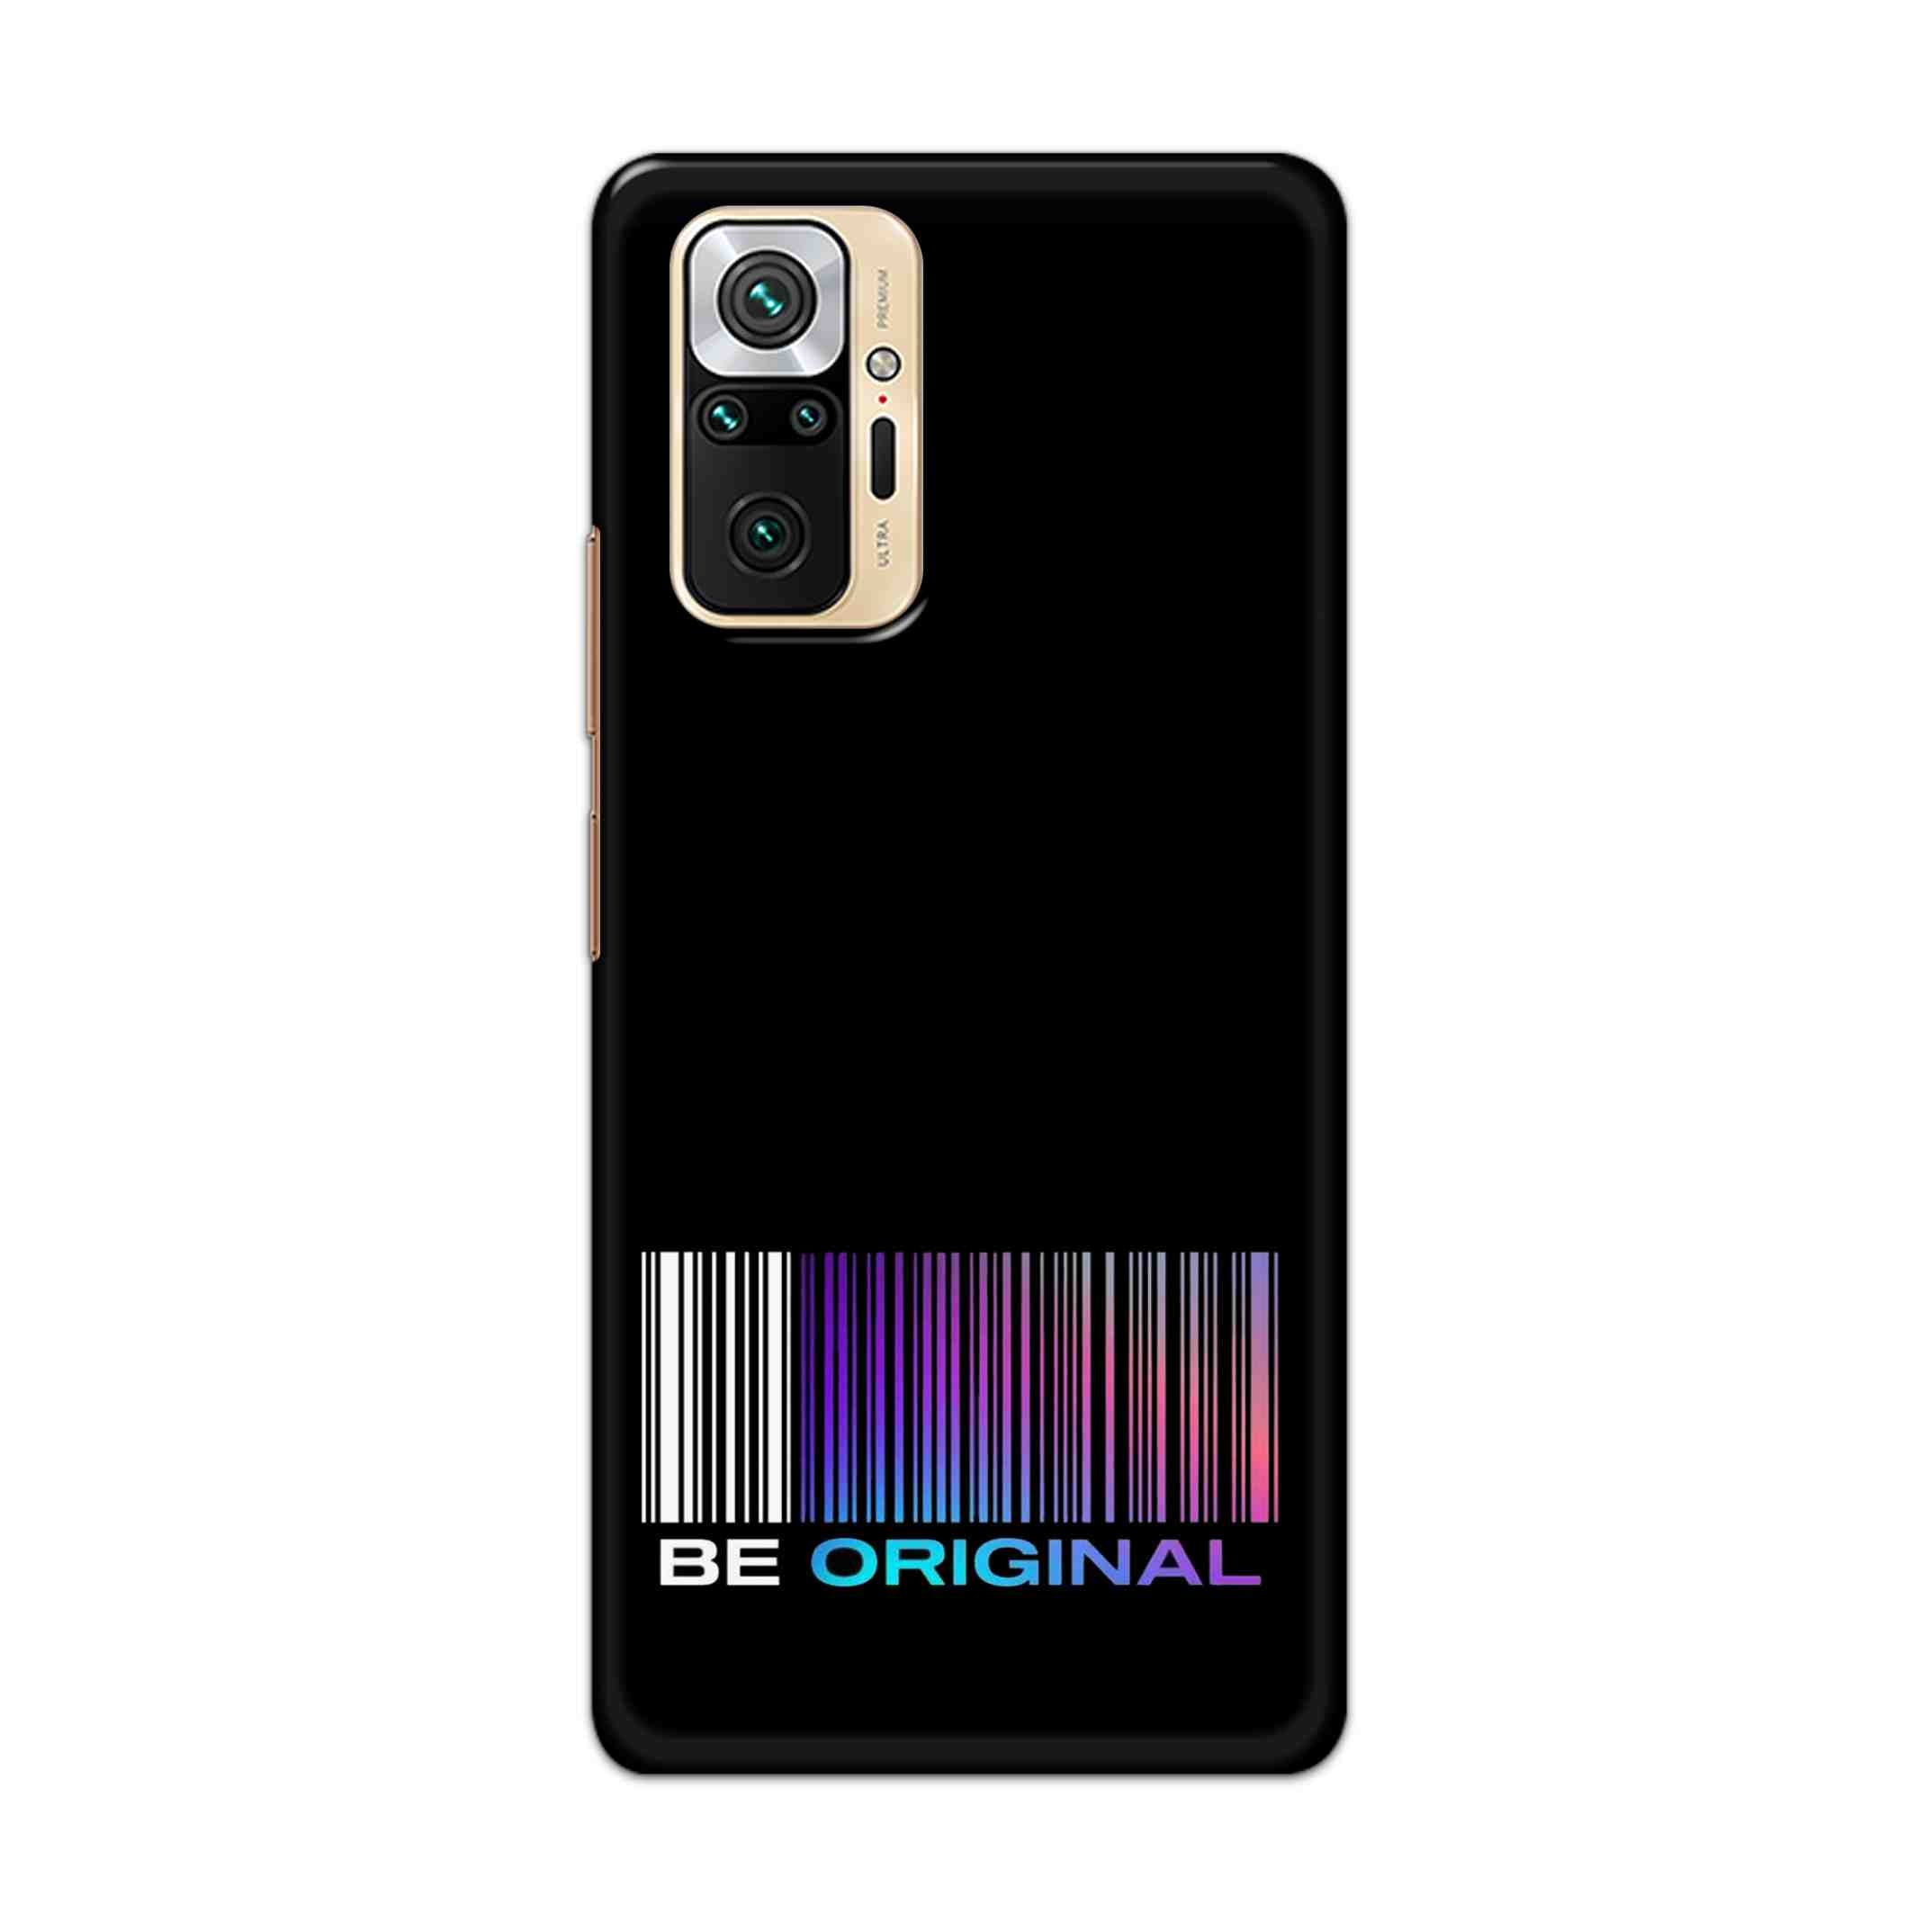 Buy Be Original Hard Back Mobile Phone Case Cover For Redmi Note 10 Pro Online